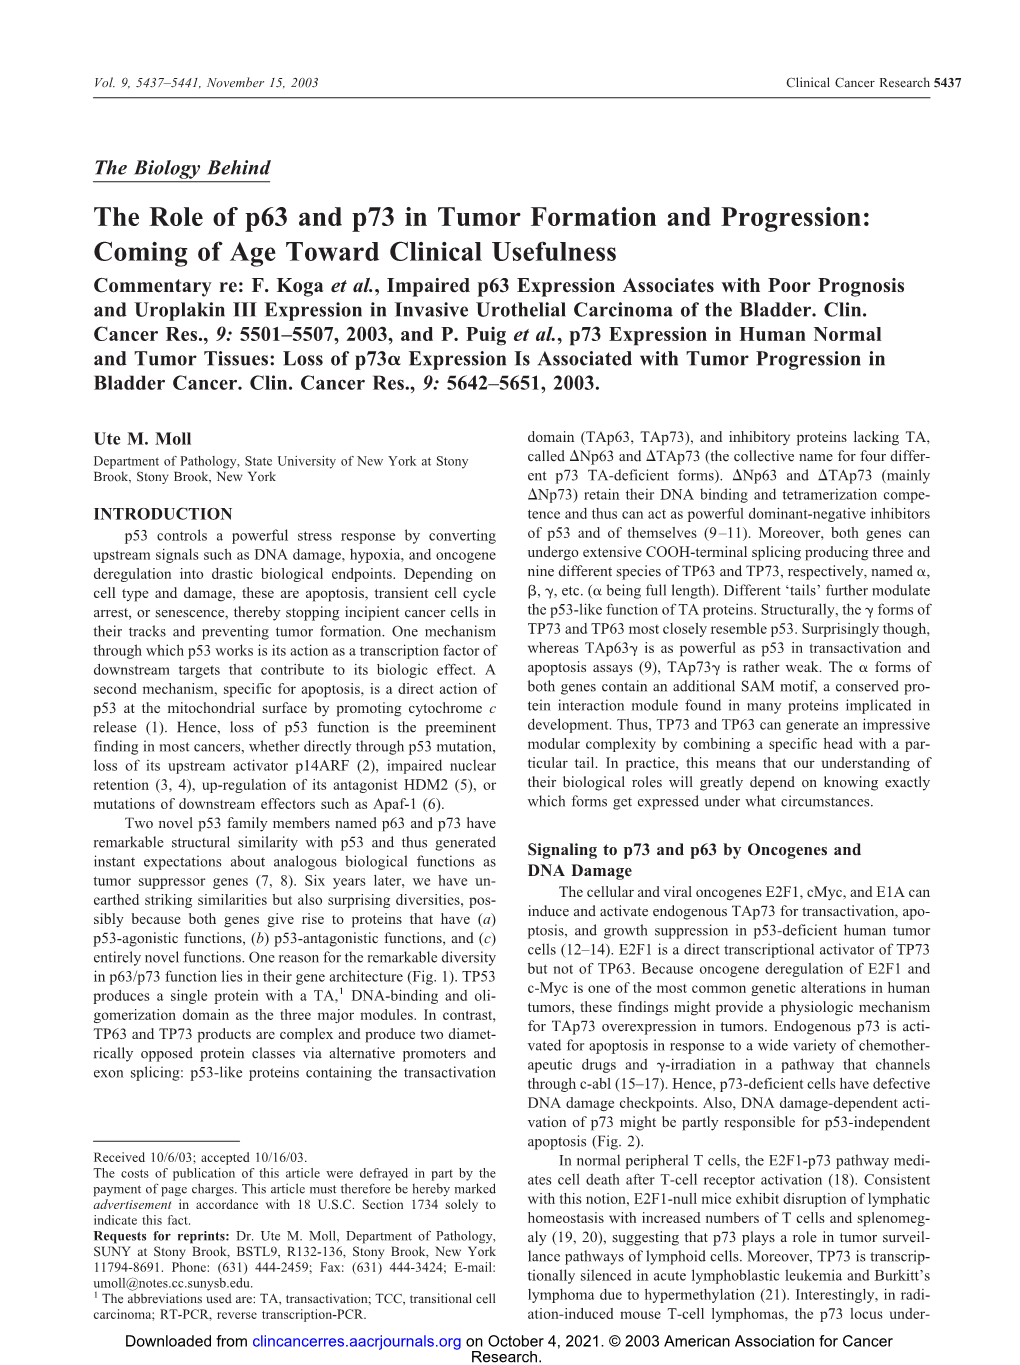 The Role of P63 and P73 in Tumor Formation and Progression: Coming of Age Toward Clinical Usefulness Commentary Re: F